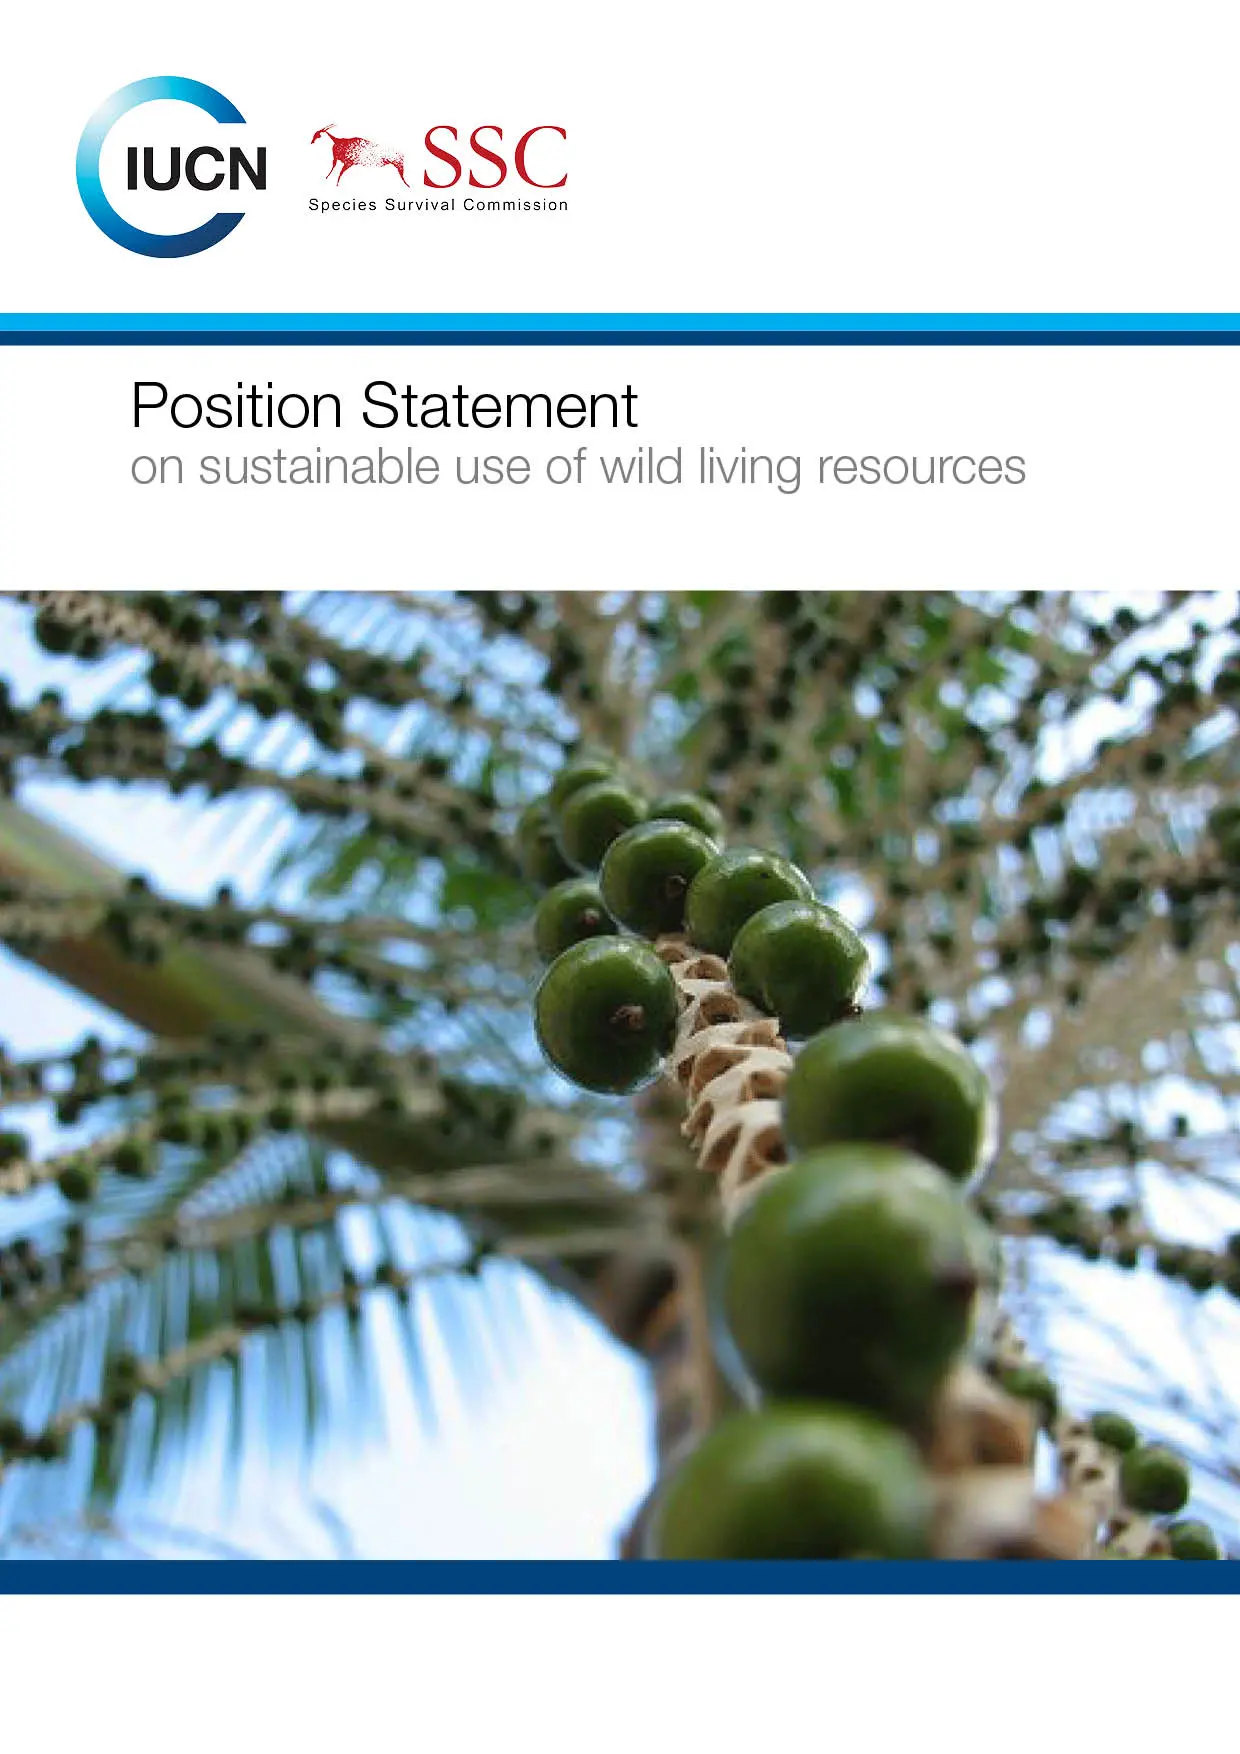 Position Statement on sustainable use of wild living resources